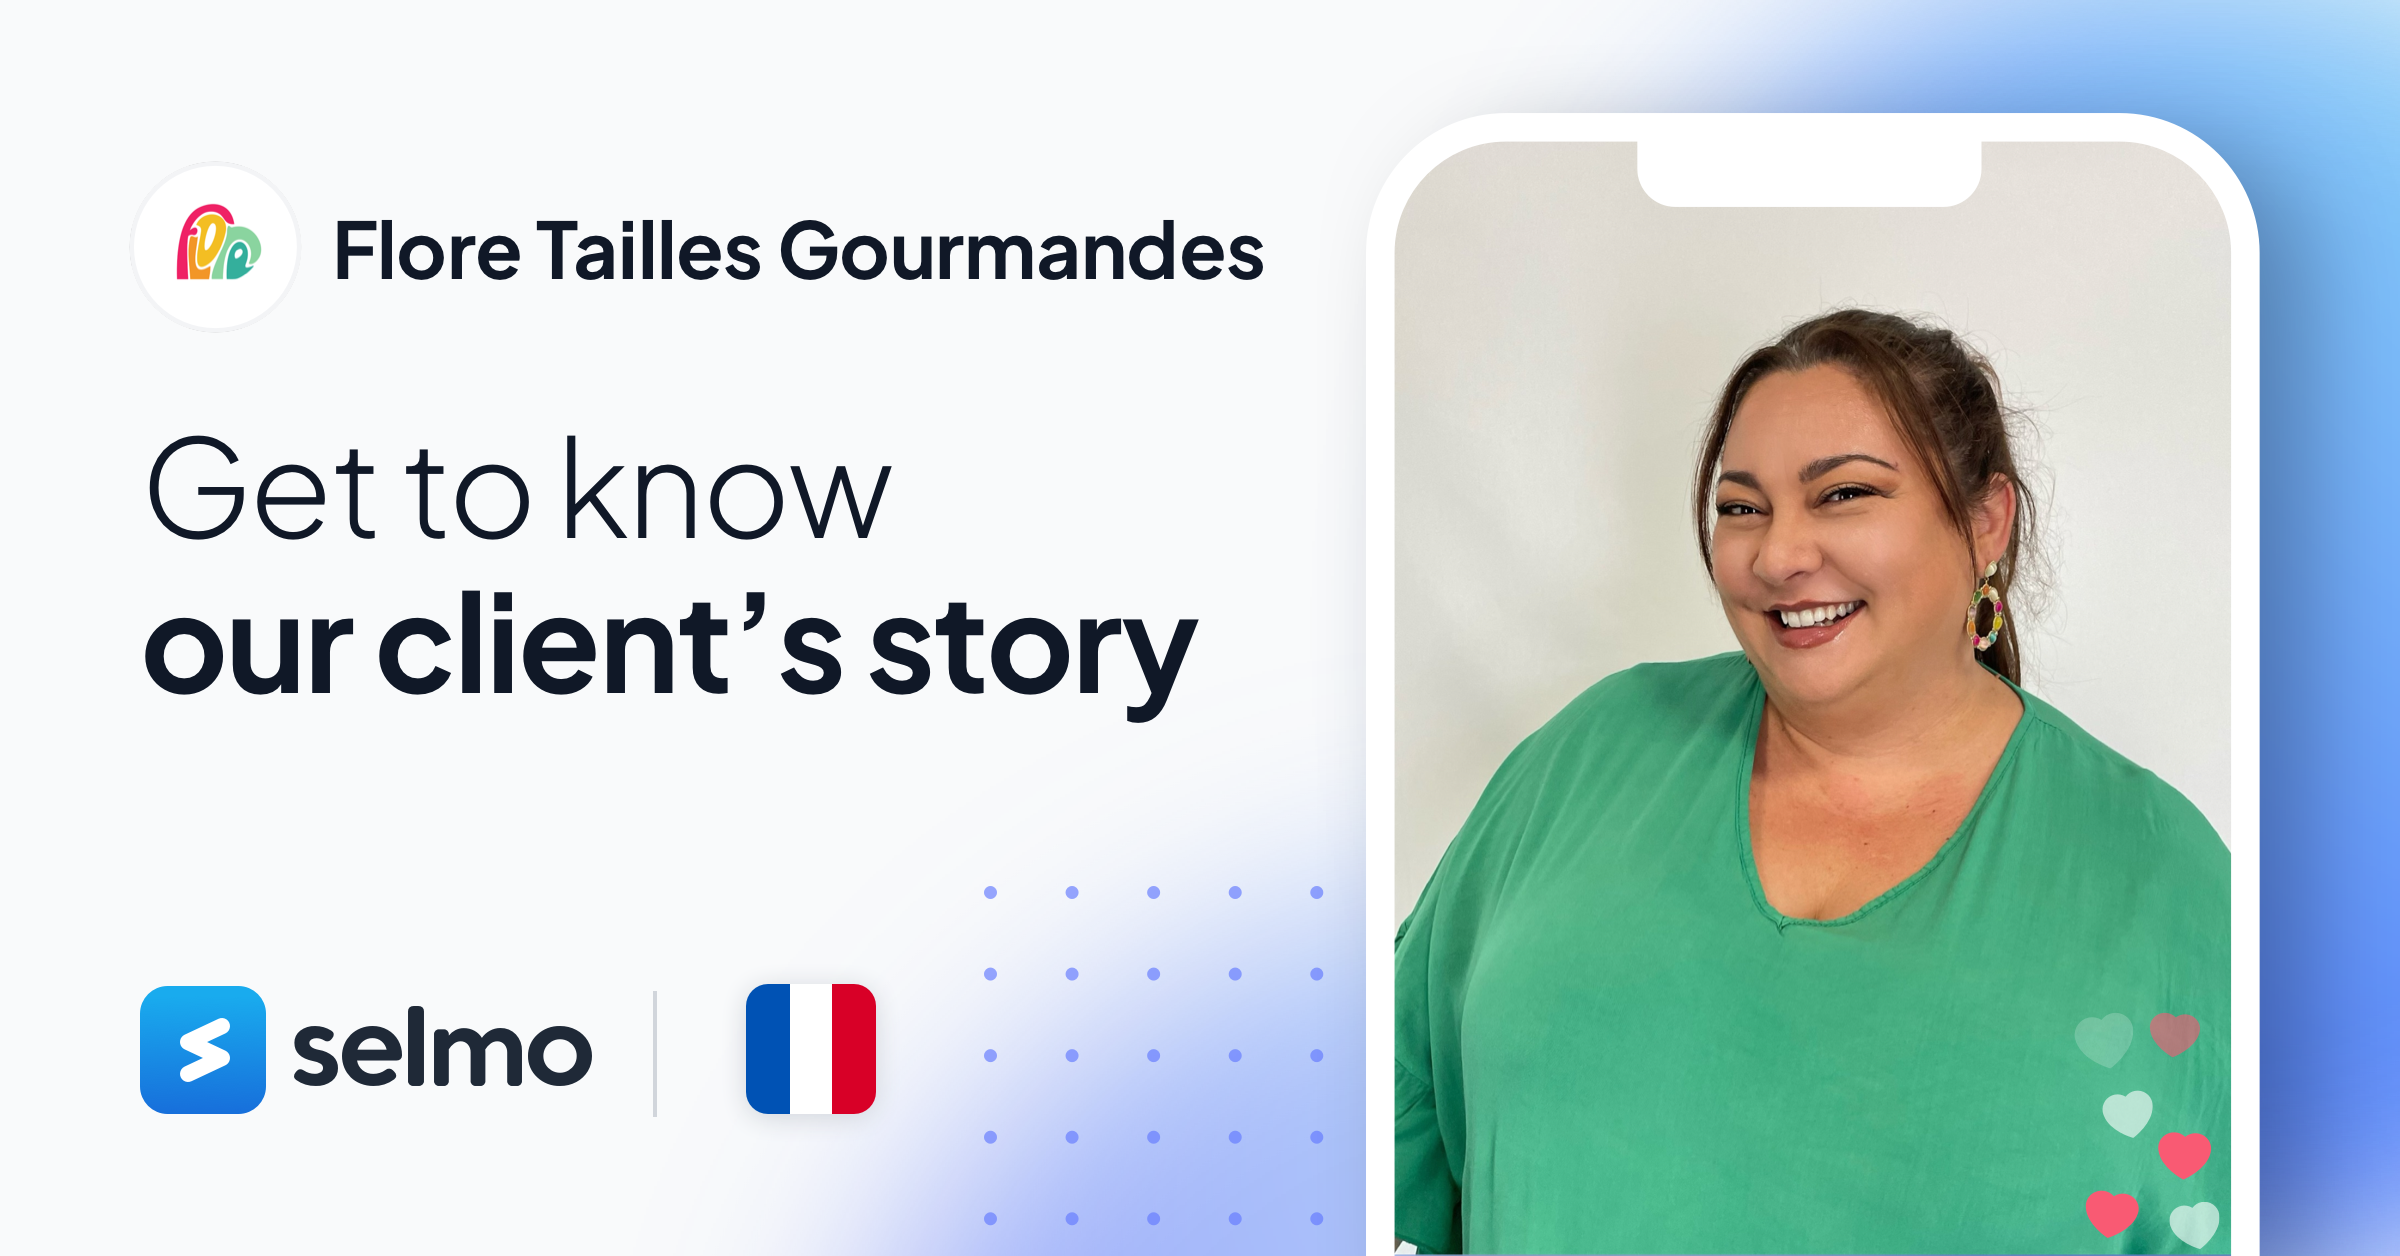 Check out how boutique Flore Tailles Gourmandes uses live sales to build an engaged community